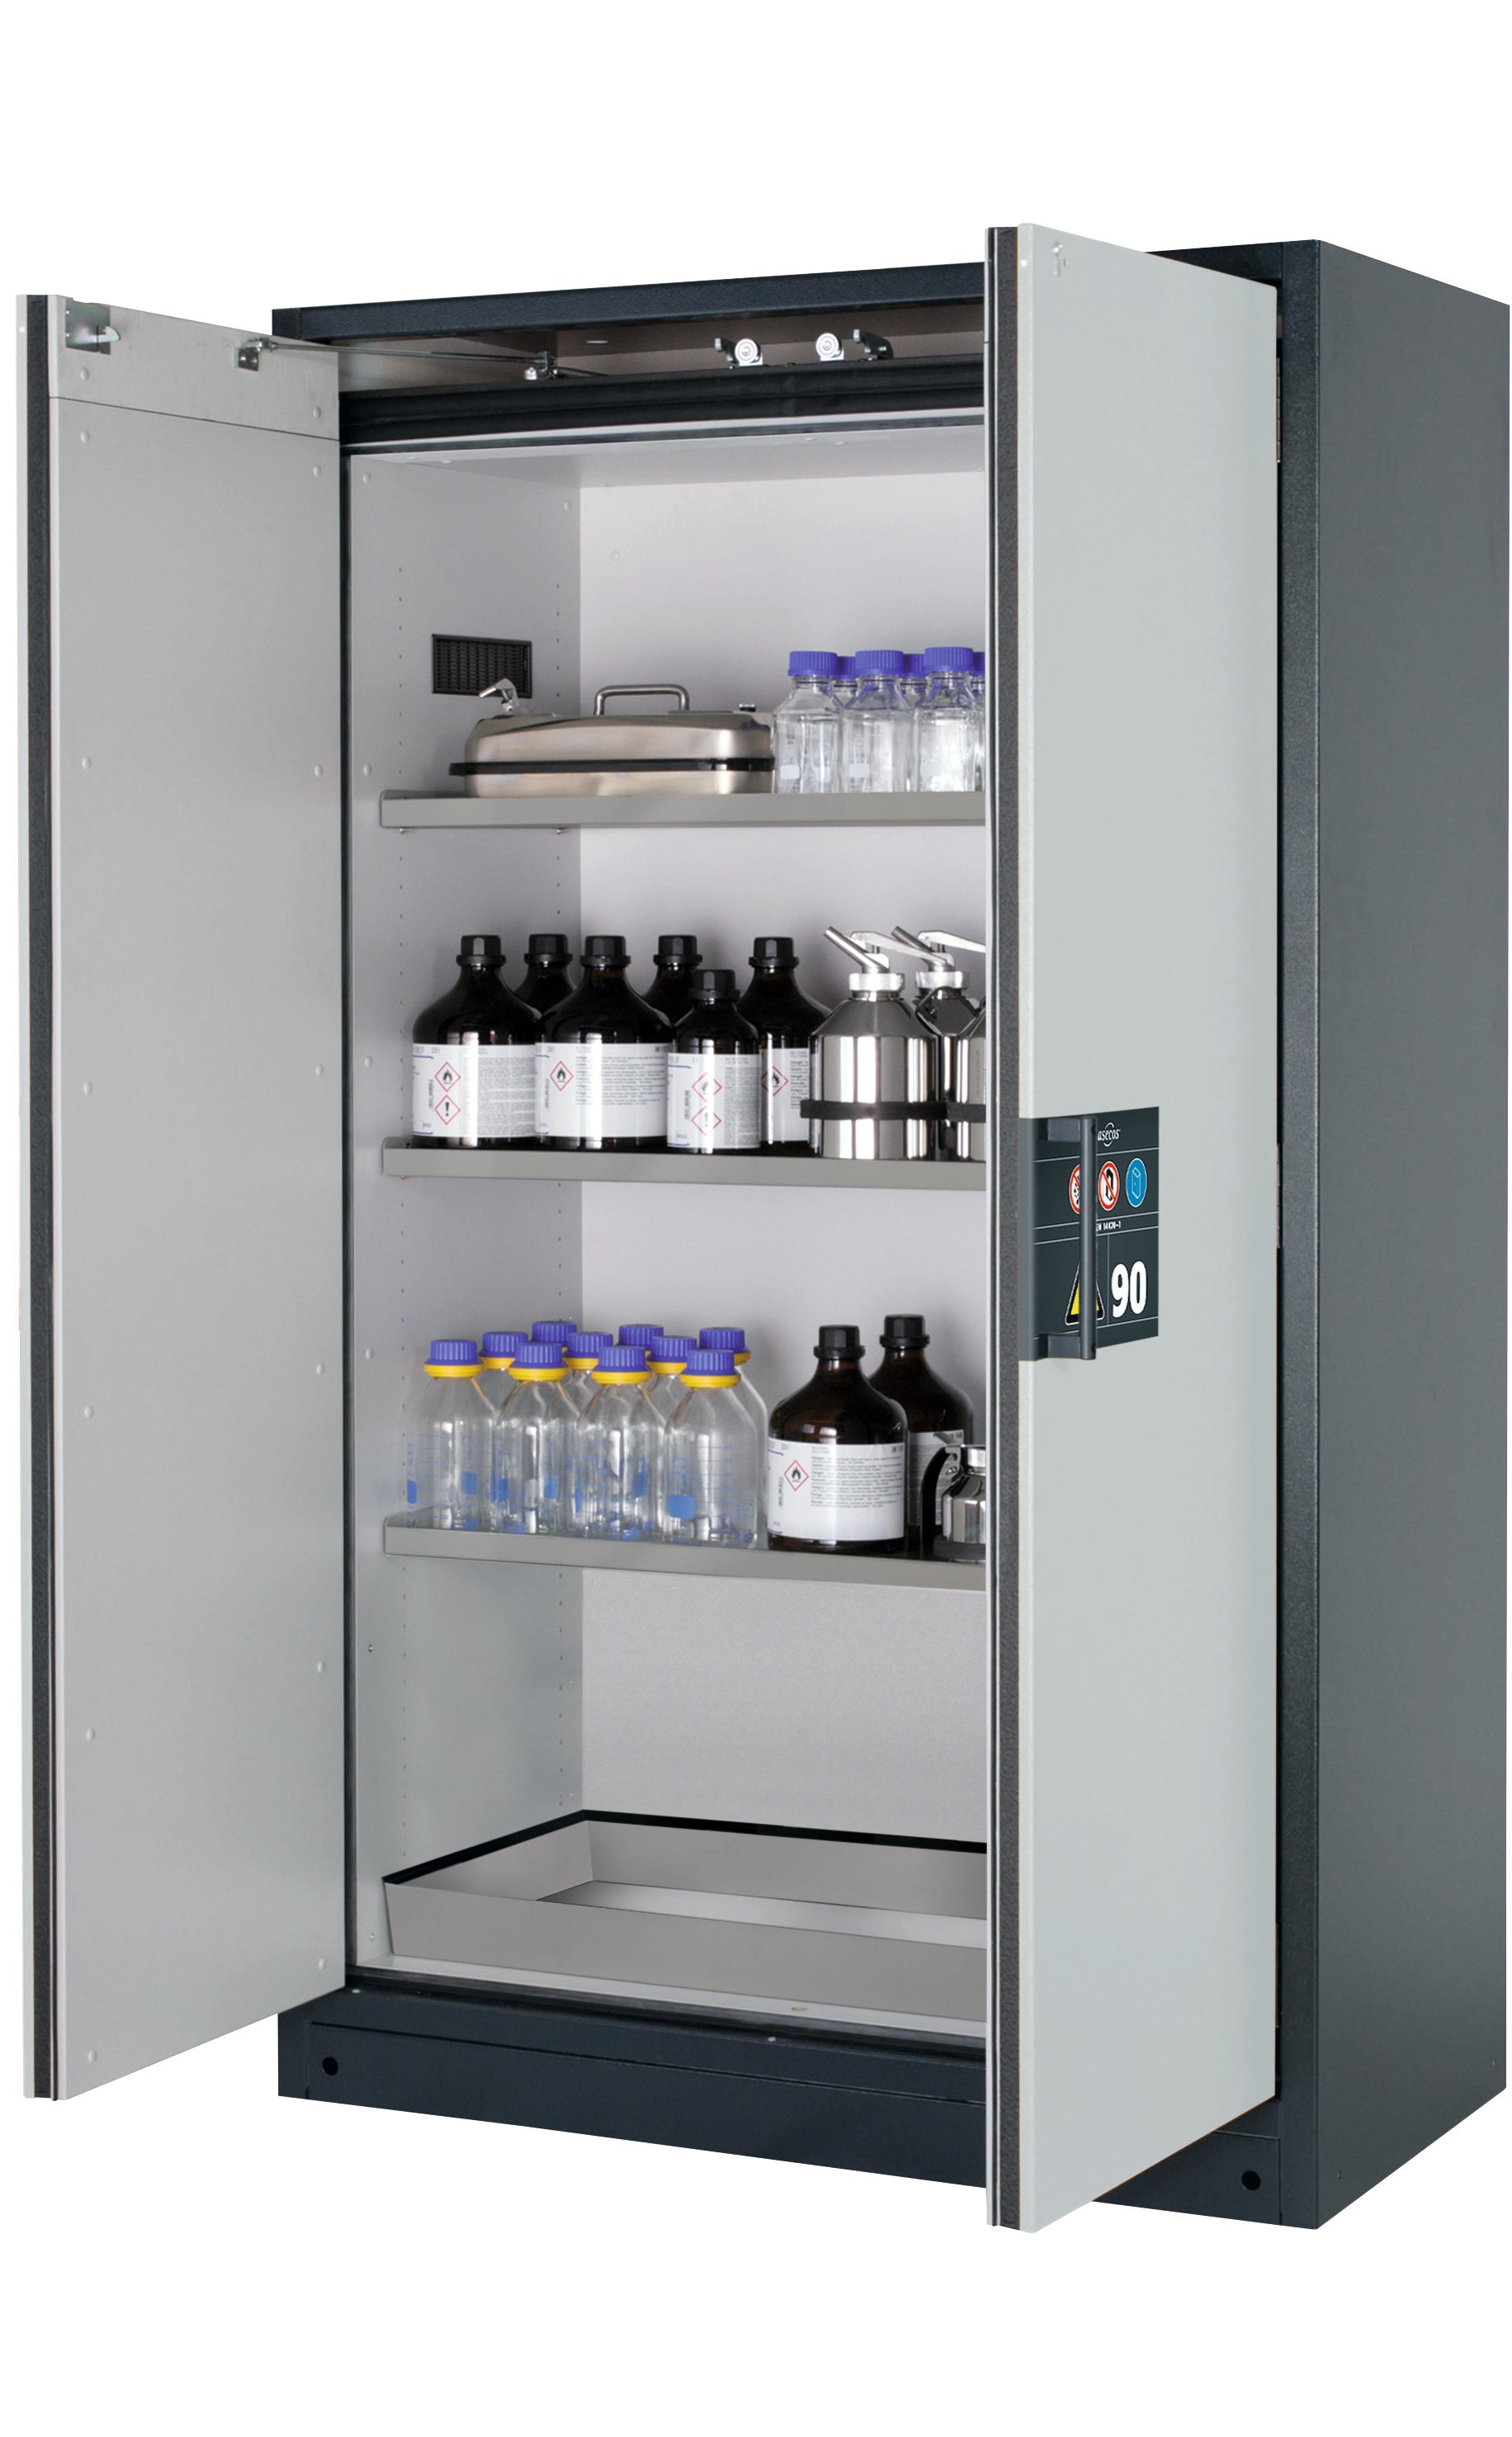 Type 90 safety storage cabinet Q-CLASSIC-90 model Q90.195.120 in light grey RAL 7035 with 3x shelf standard (stainless steel 1.4301),